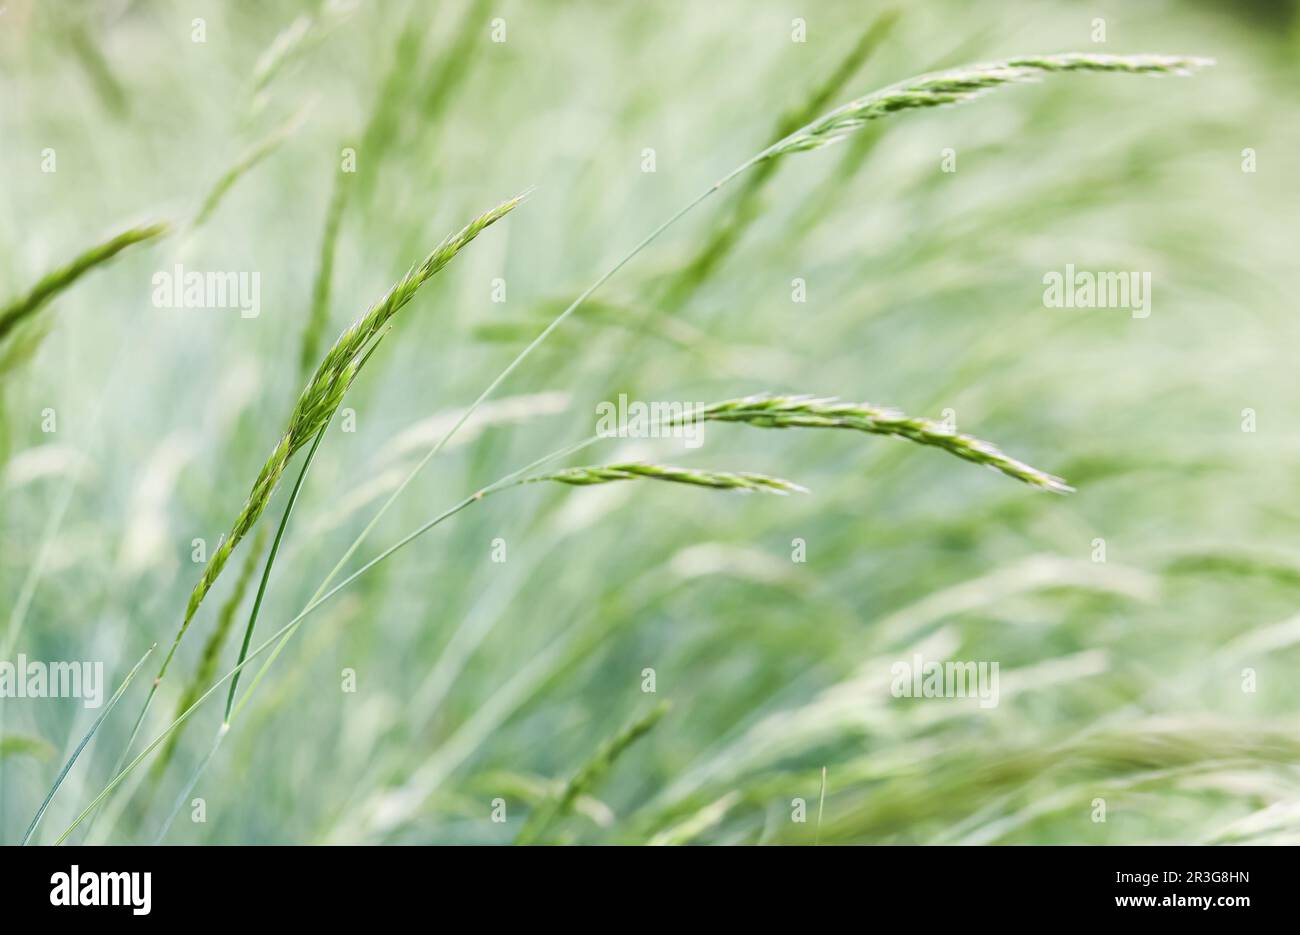 Background from decorative grass Blue fescue. Spikelets of Festuca glauca Stock Photo